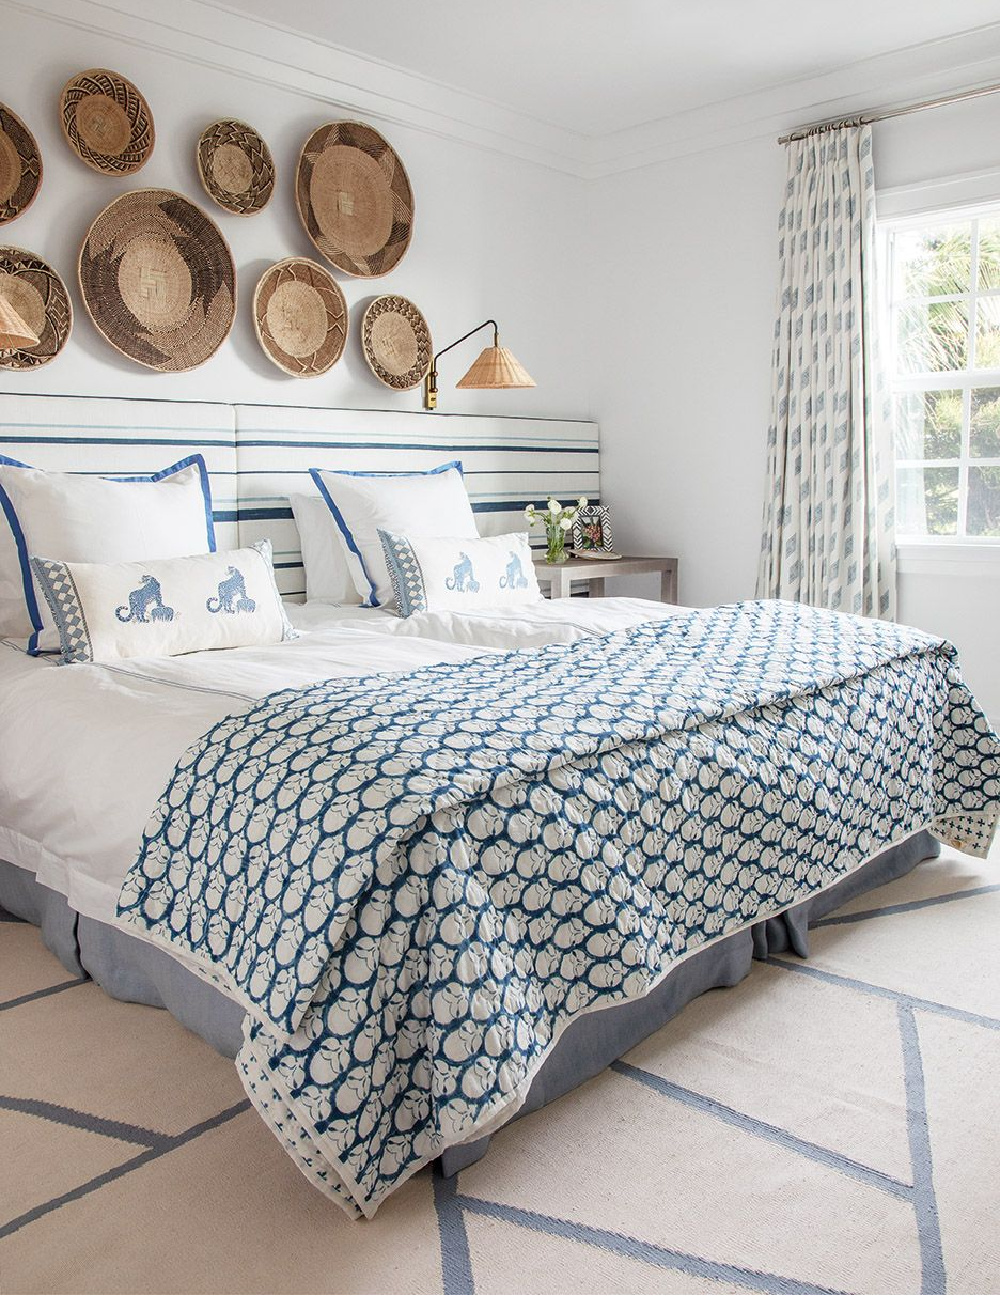 Handwoven baskets from Zimbabwe and wicker sconce above bed with indigo striped headboard and bedding - design by Anne Hepfer in MOOD (Gibbs Smith, 2022). #blueandwhite #beachybedroom